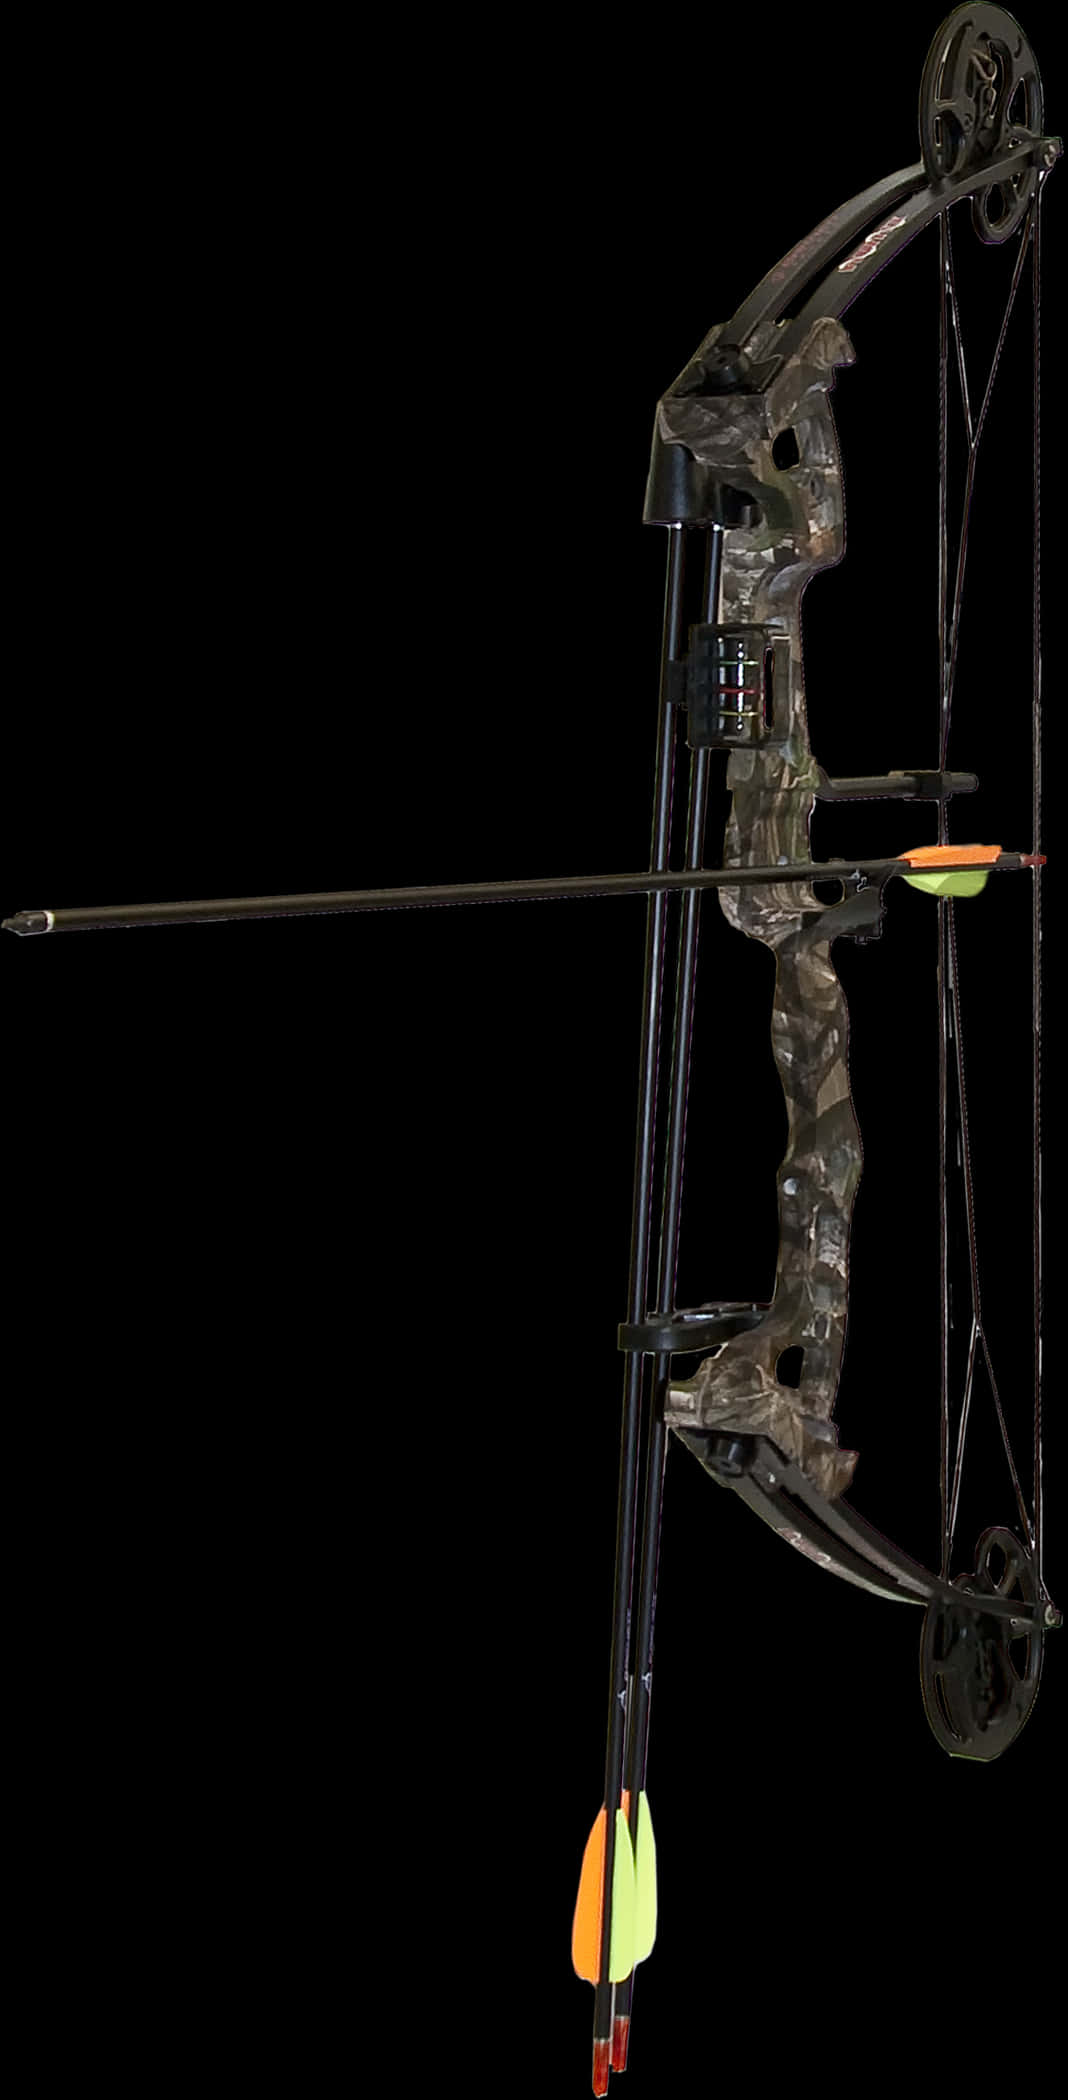 A Bow And Arrow On A Stand